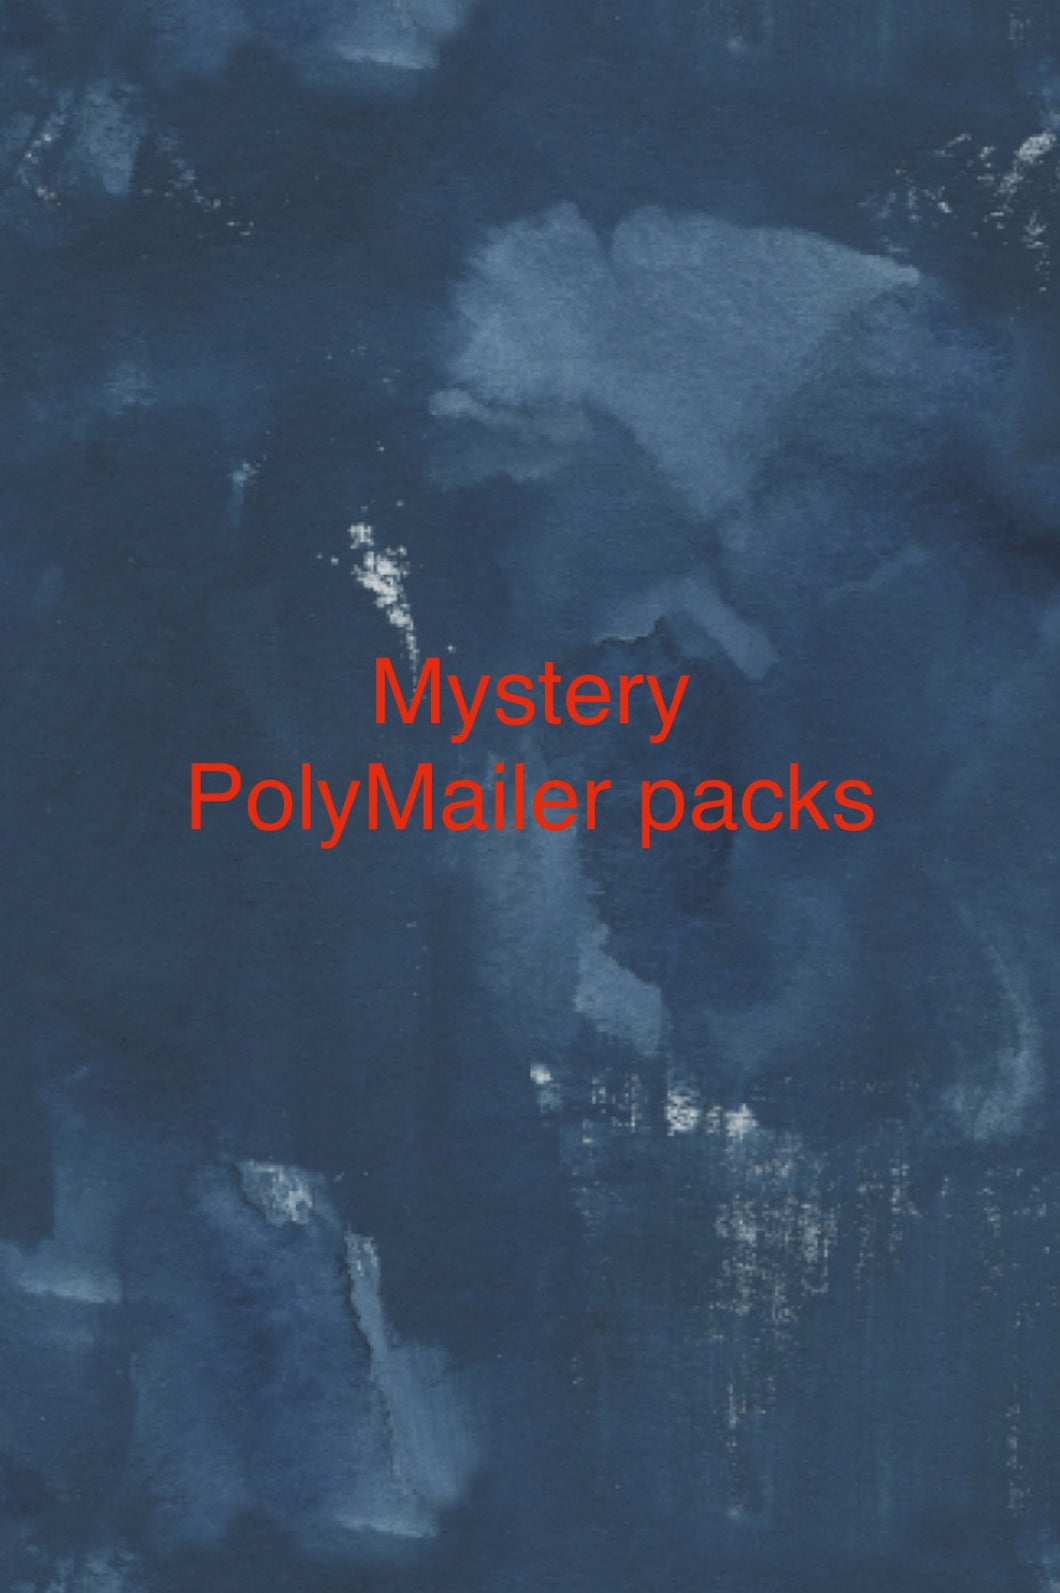 Mystery 19x24 poly mailers set of 10